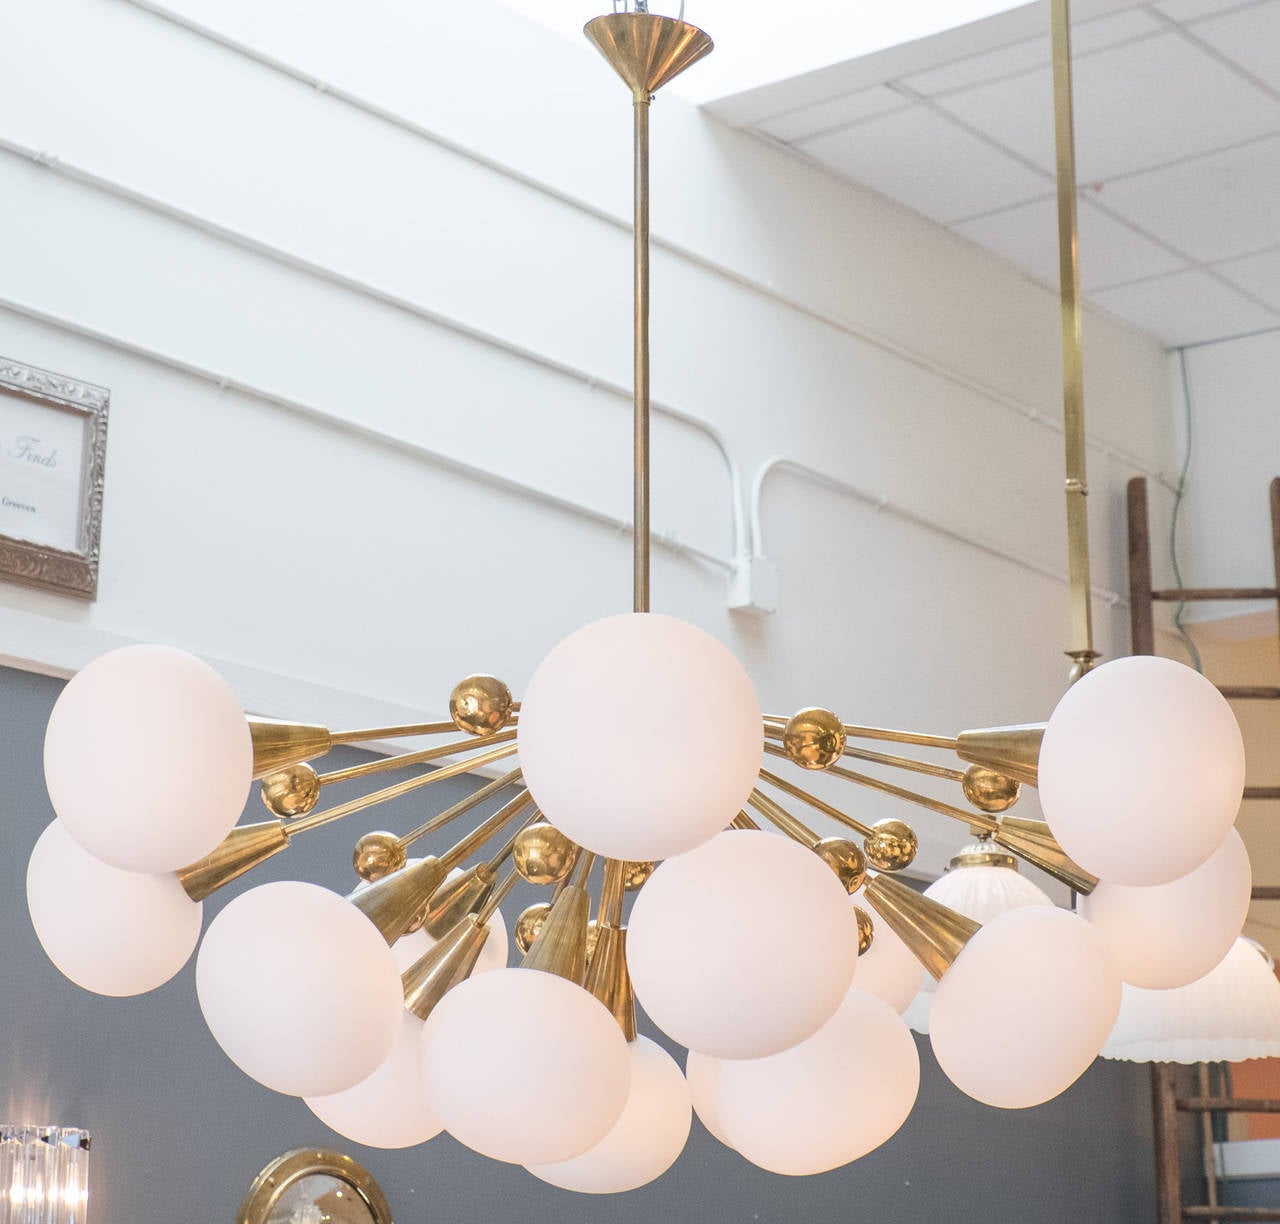 Italian vintage Murano glass and brass Sputnik chandelier in the style of Stilnovo. Fifteen glass globes and fifteen brass balls extend on brass stems from the central brass fixture. Rewired for the US.

This piece is currently located at our